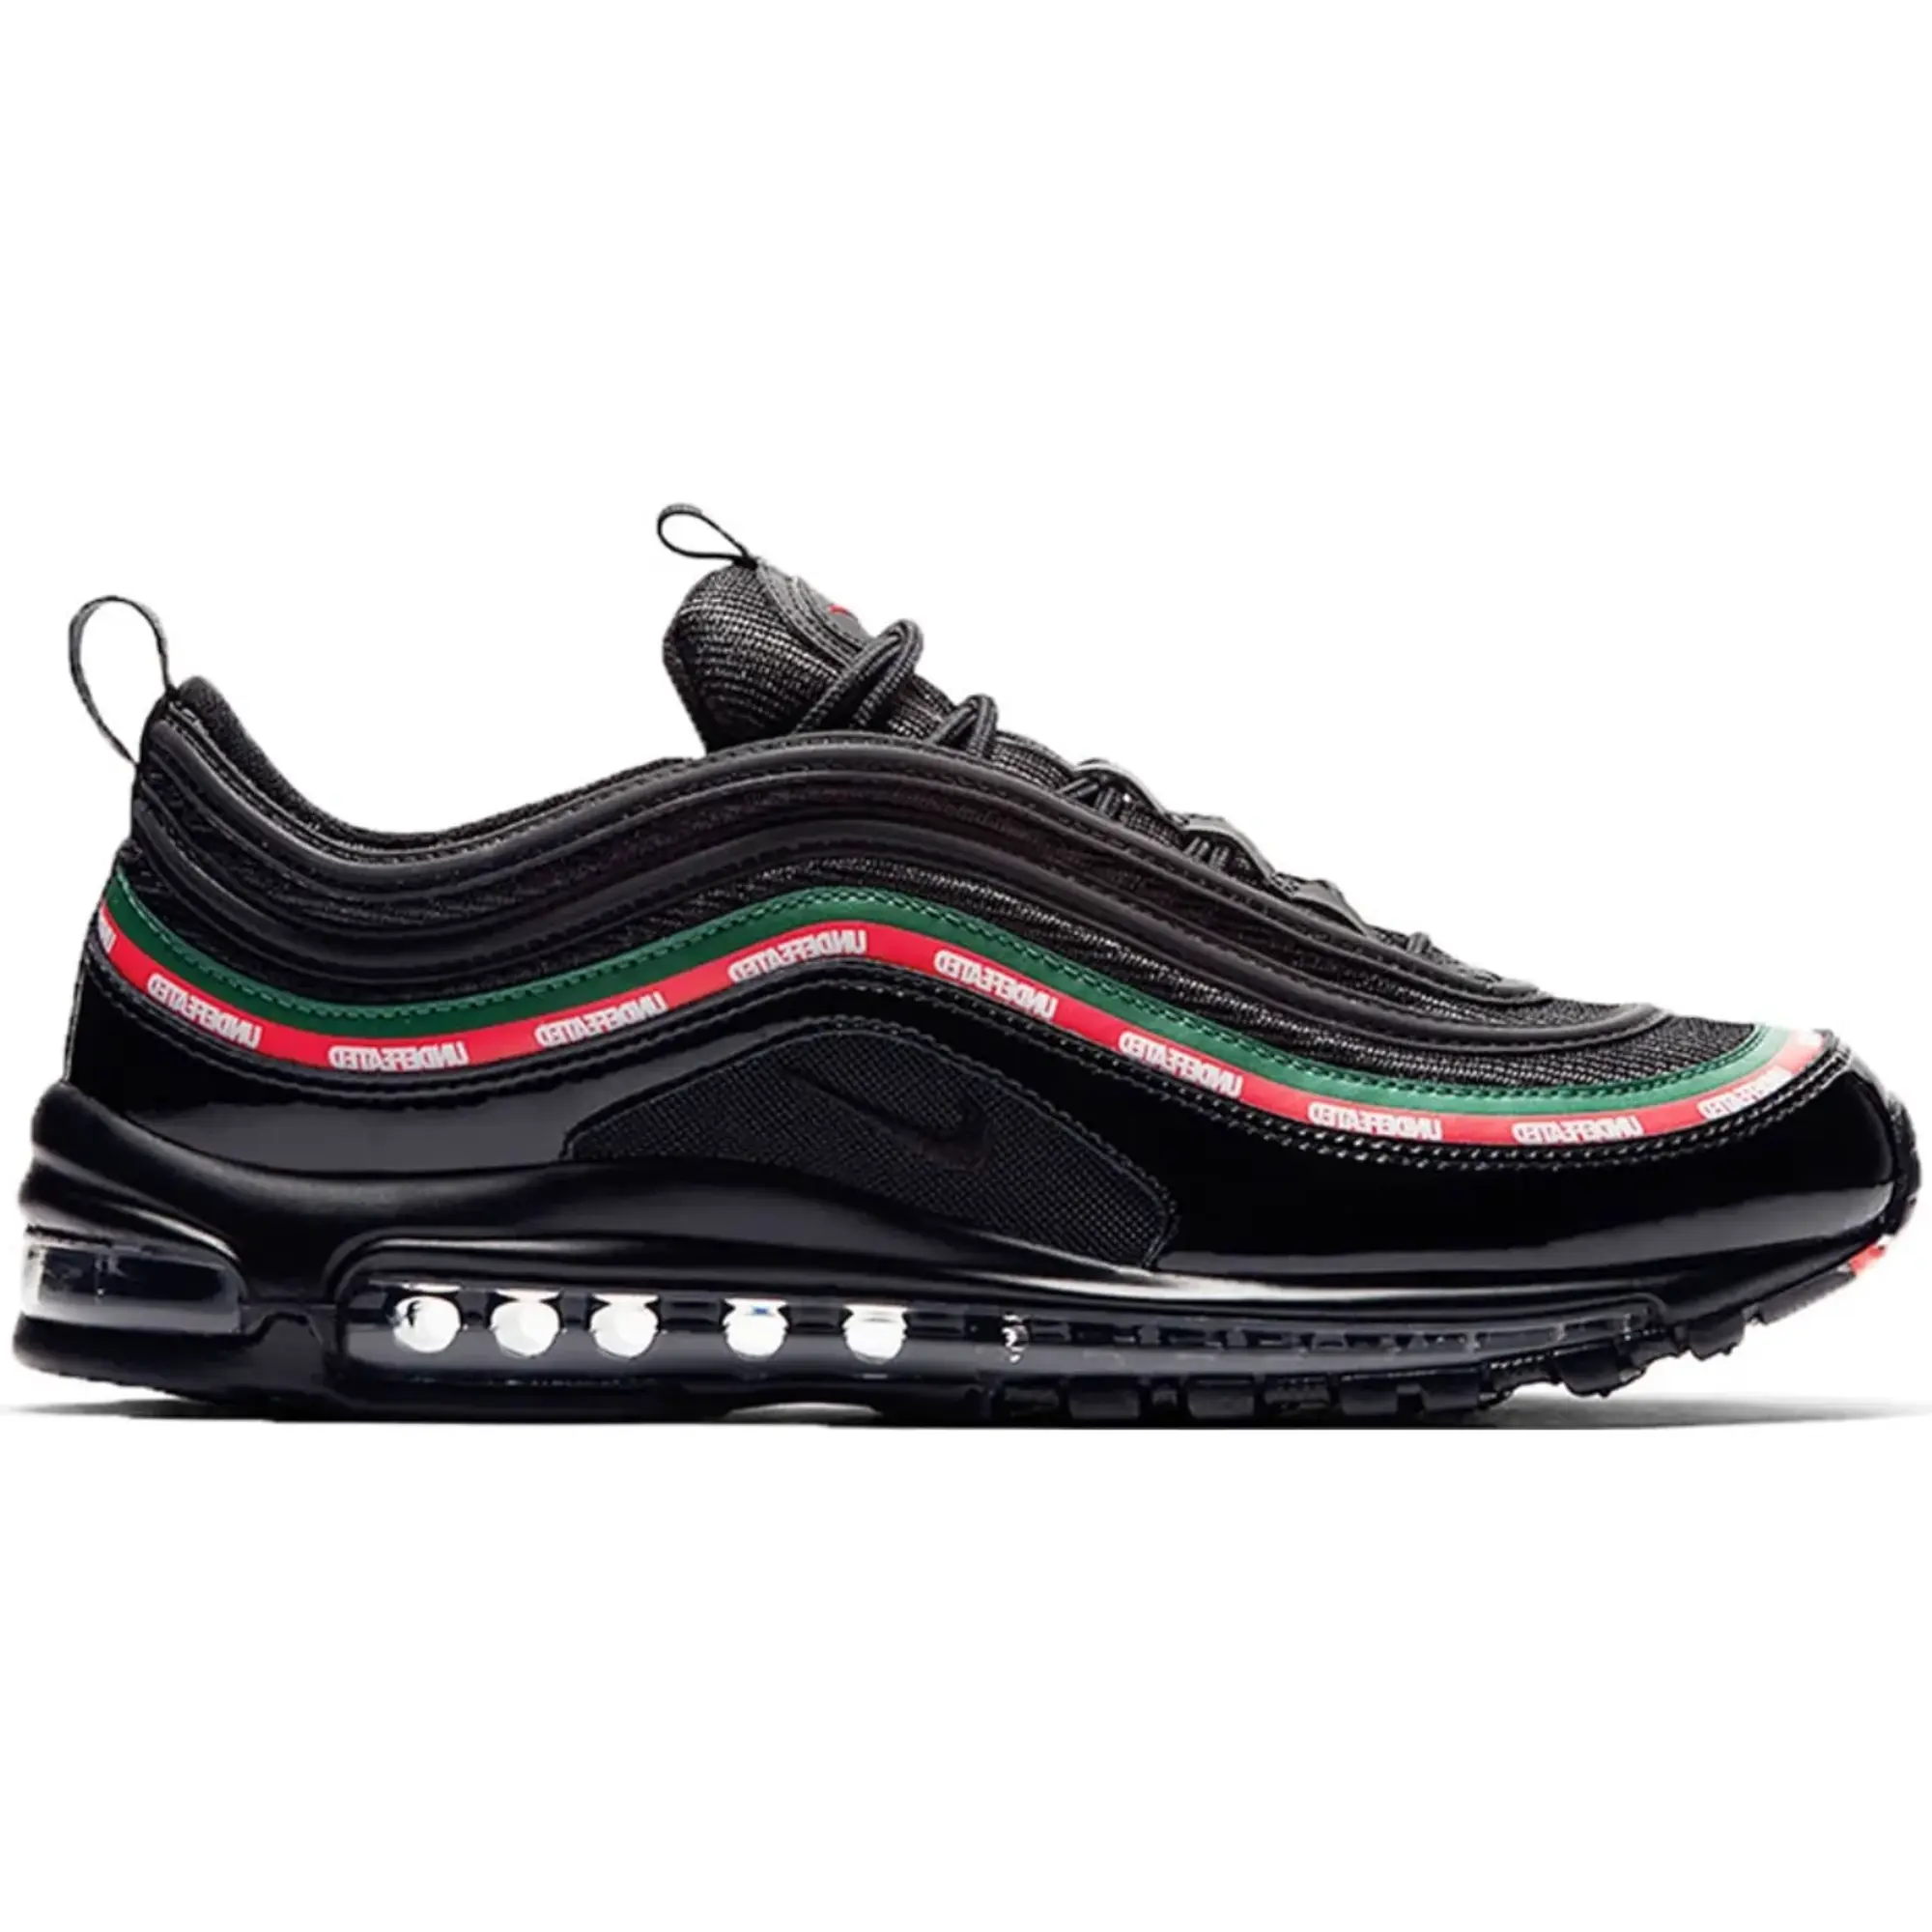 Nike x Undefeated Air Max 97 UNDFTD Black